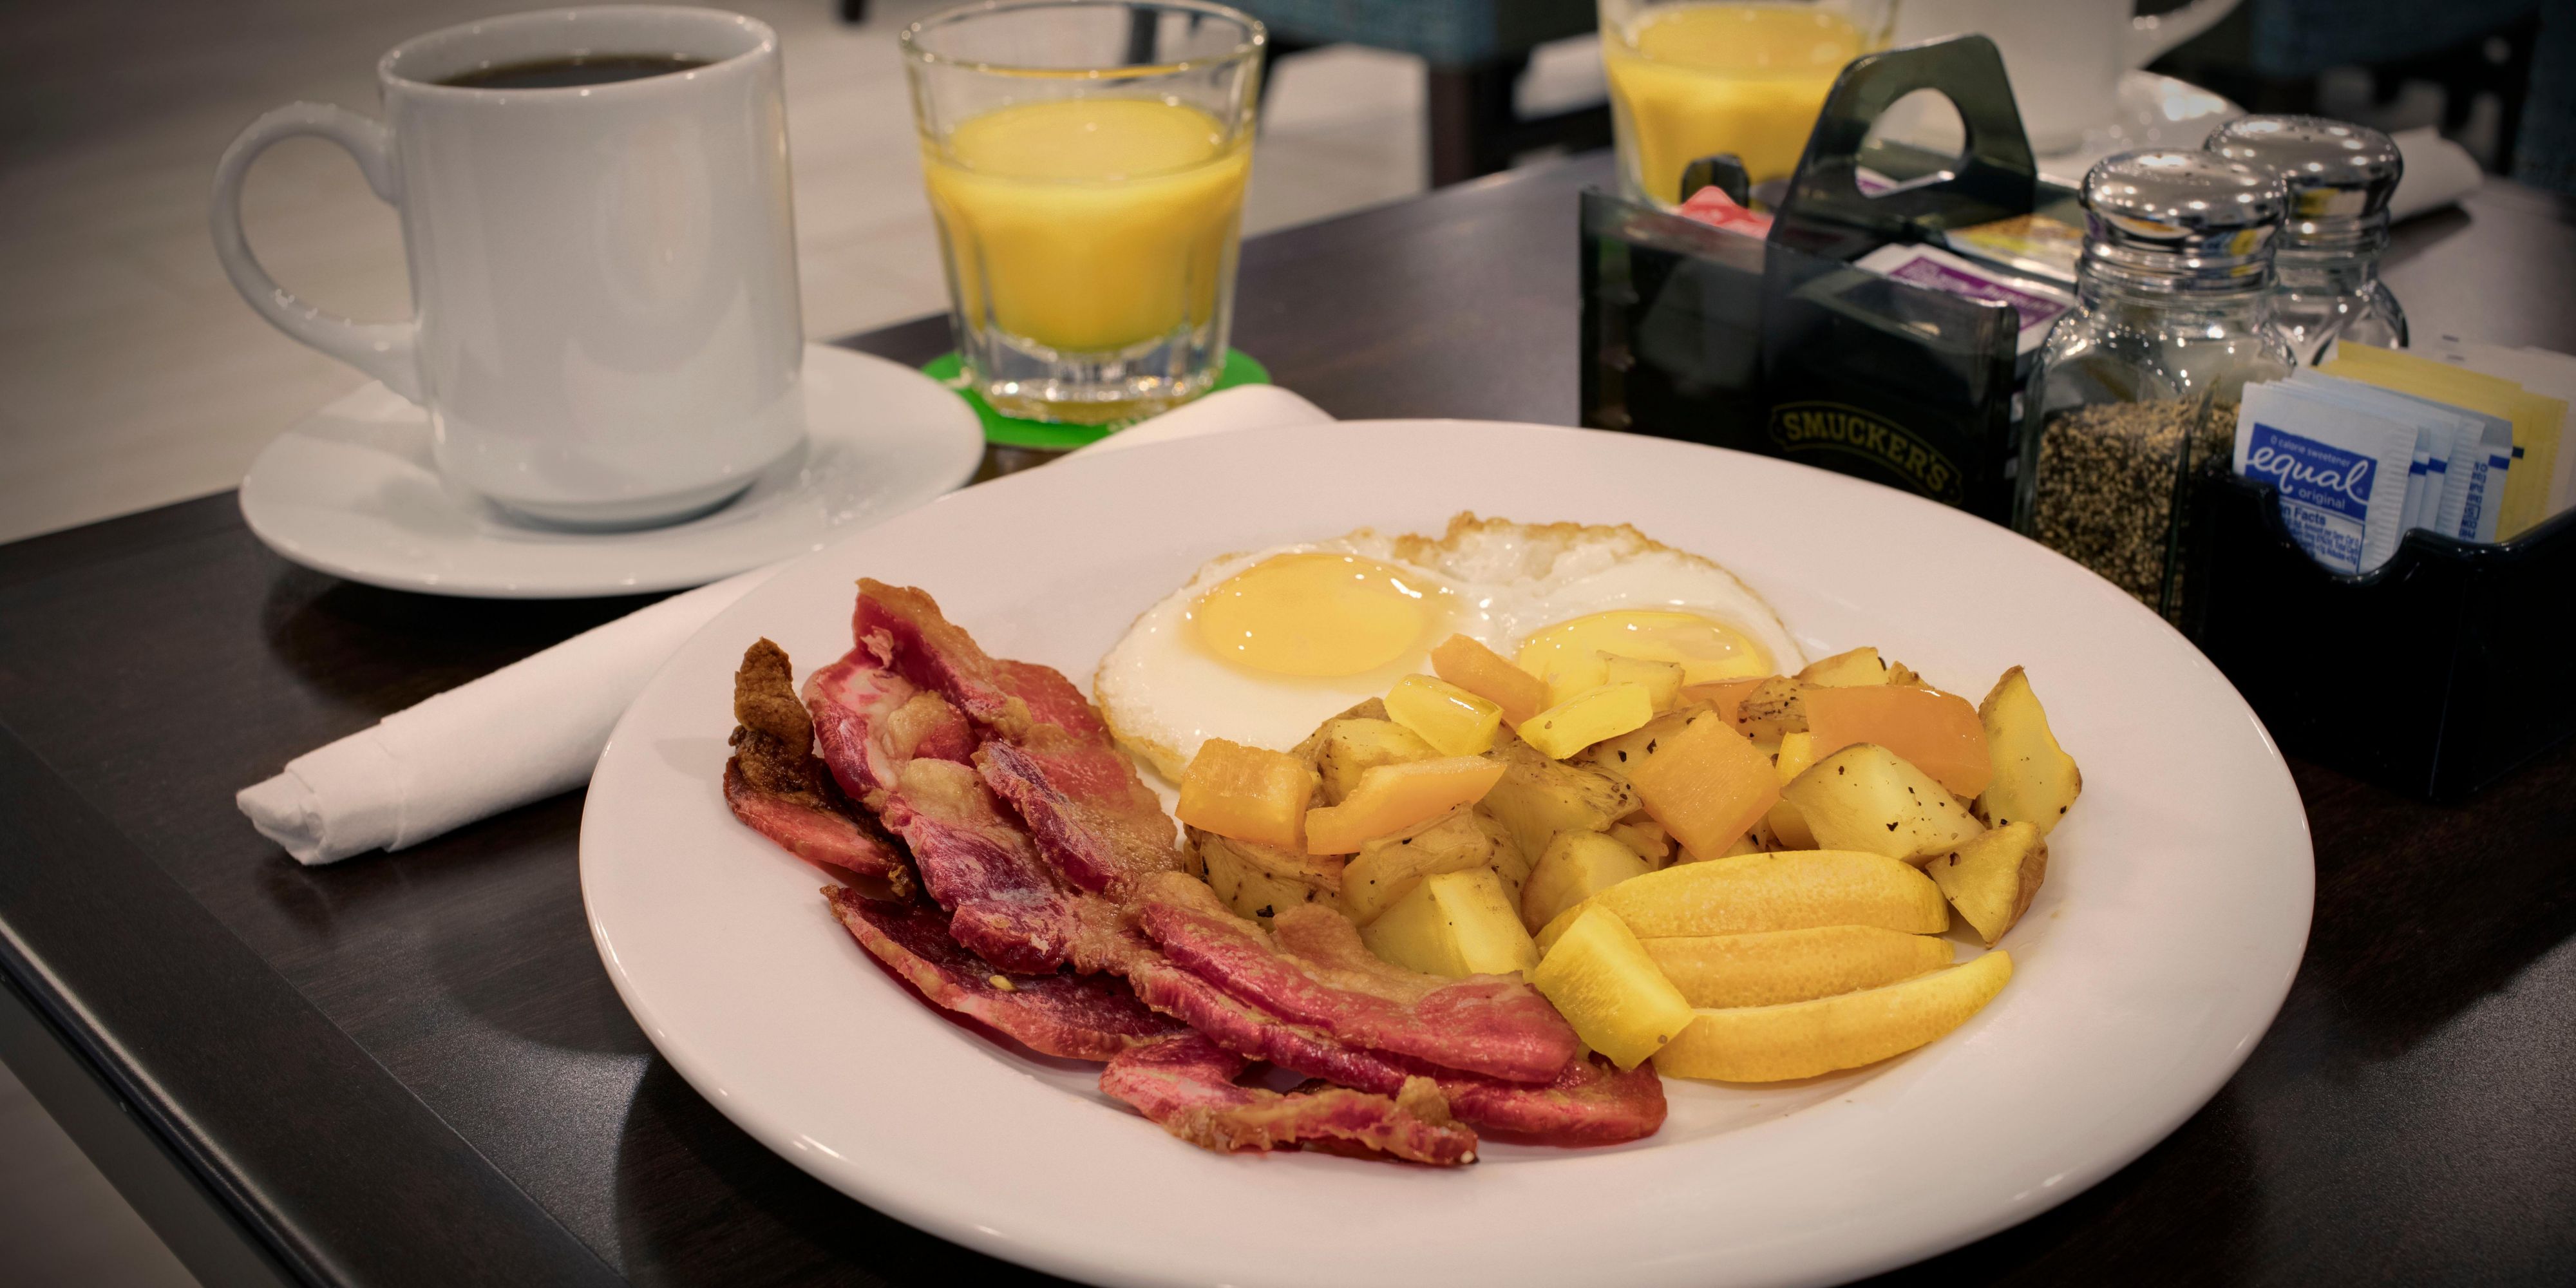 Made to Order Breakfast served daily at Emmet's Restaurant!